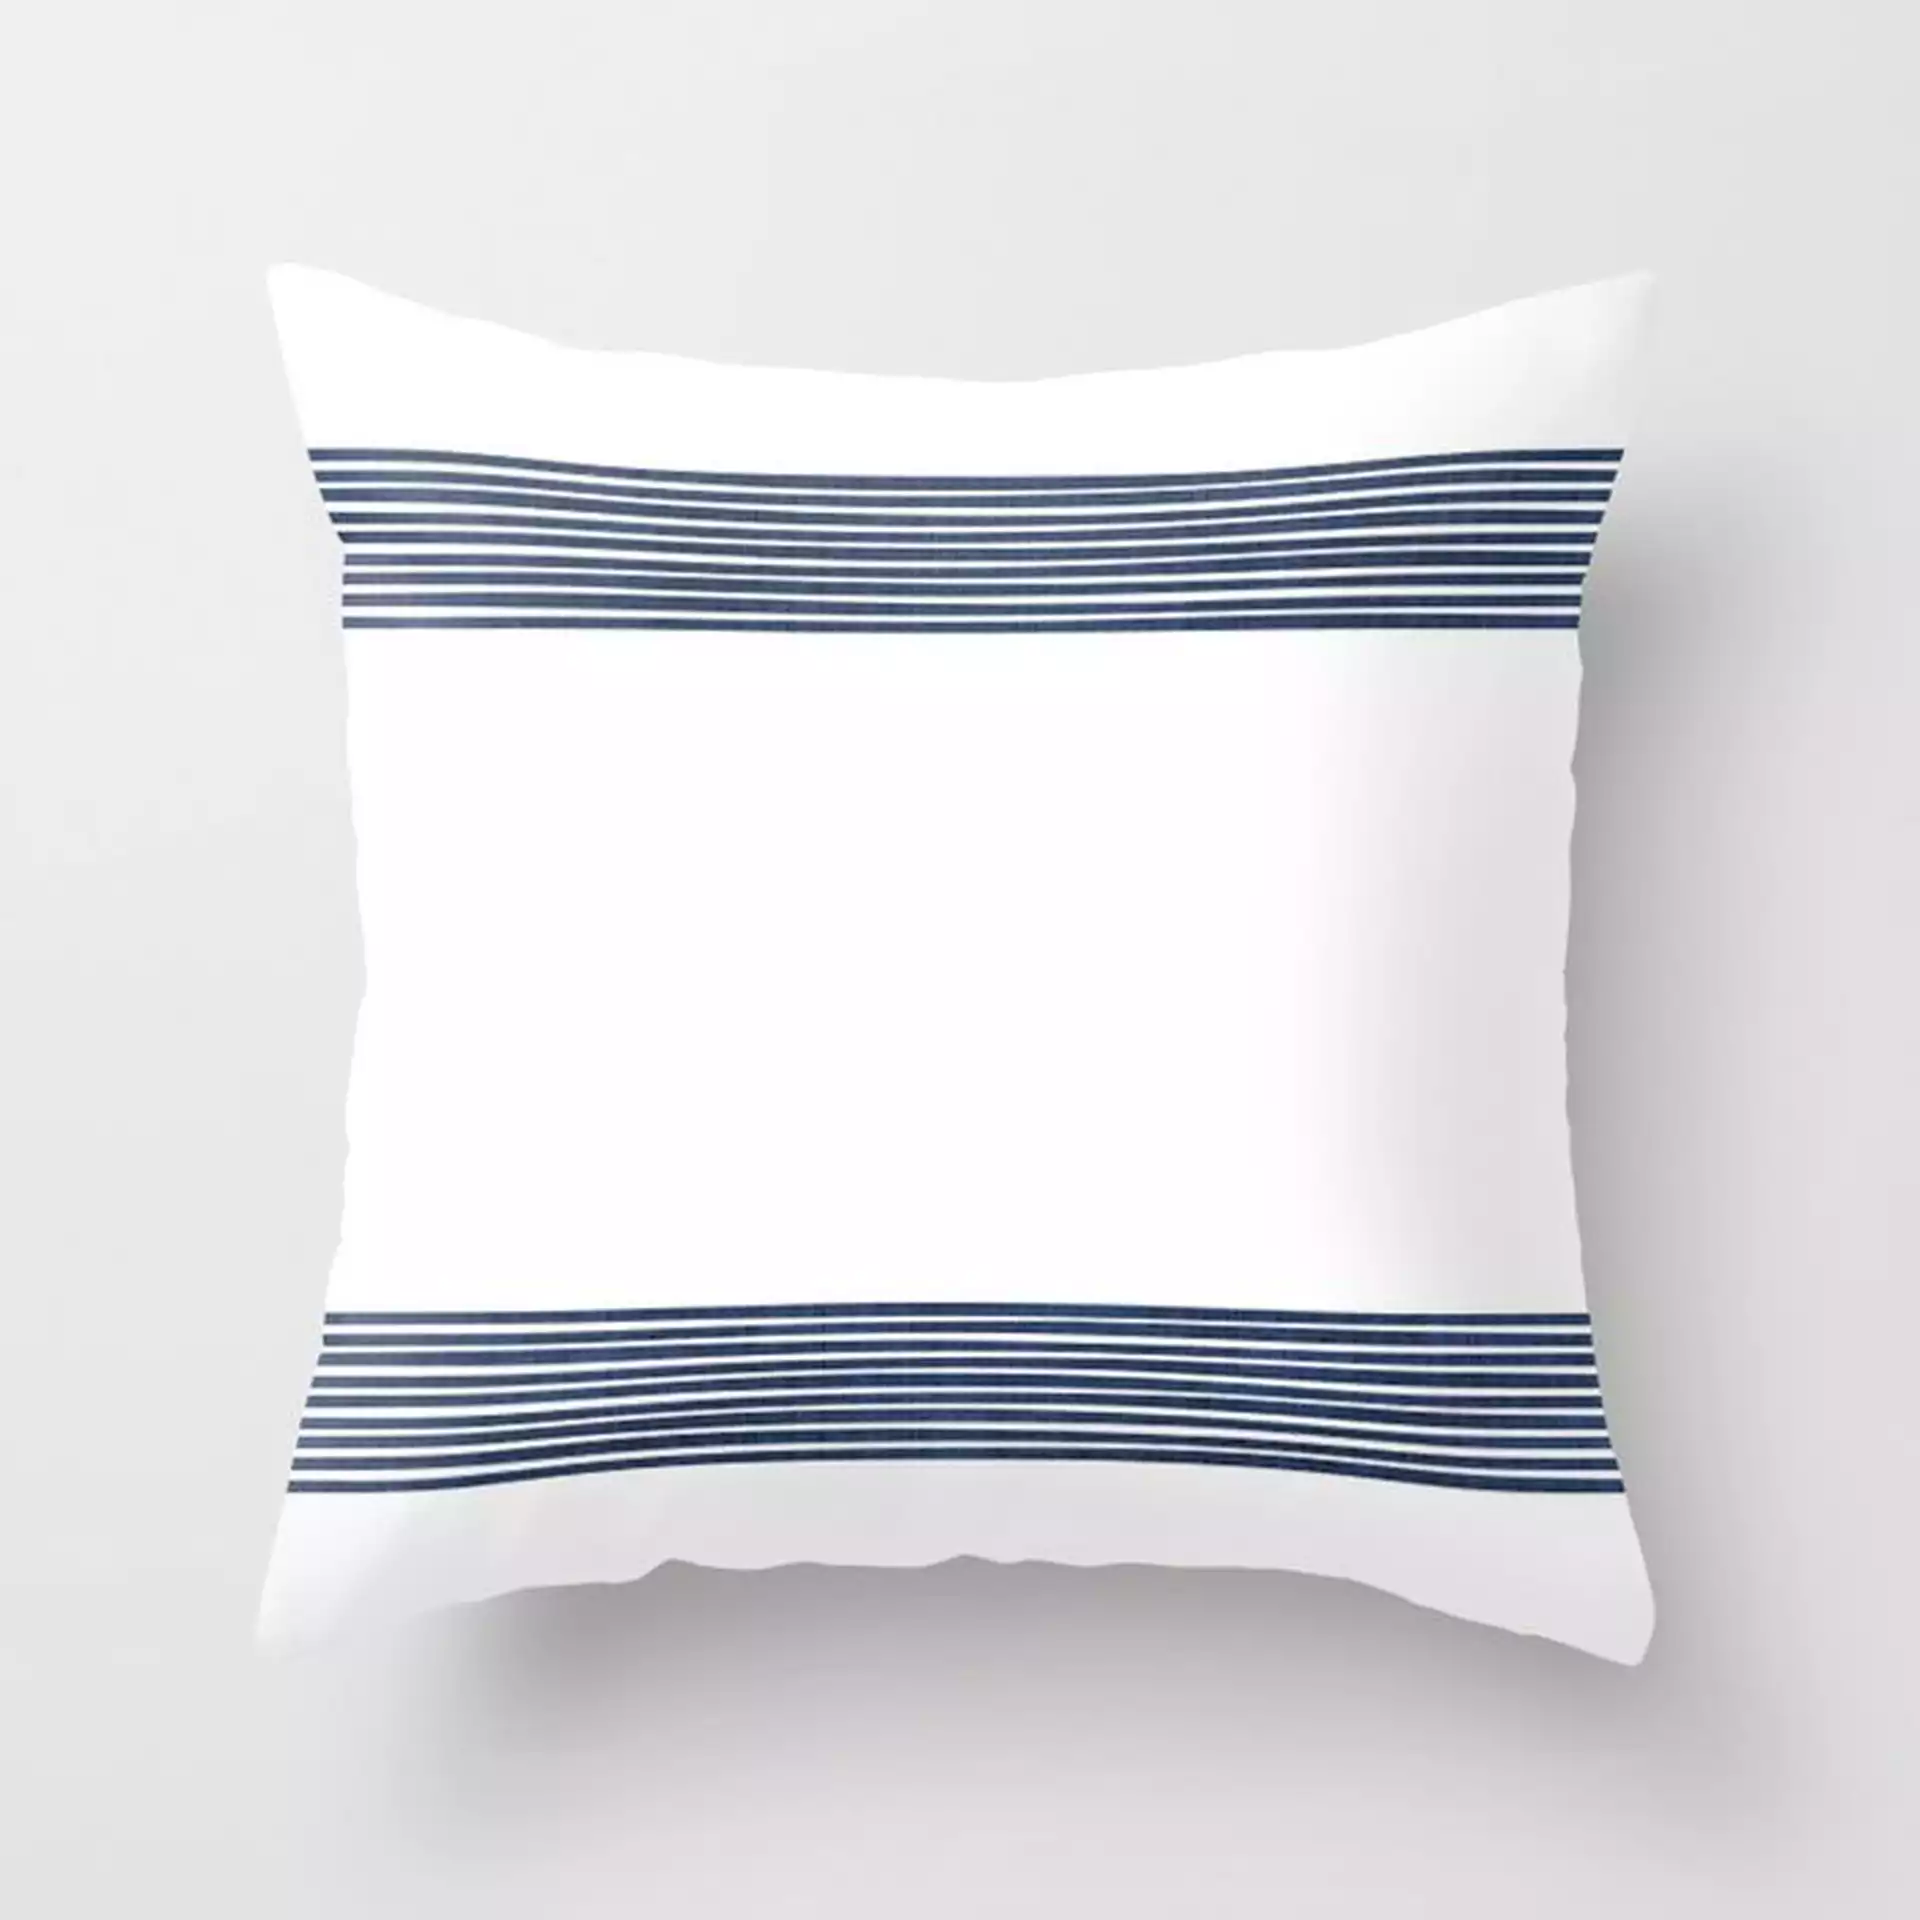 Band In Navy Couch Throw Pillow by Becky Bailey - Cover (20" x 20") with pillow insert - Indoor Pillow